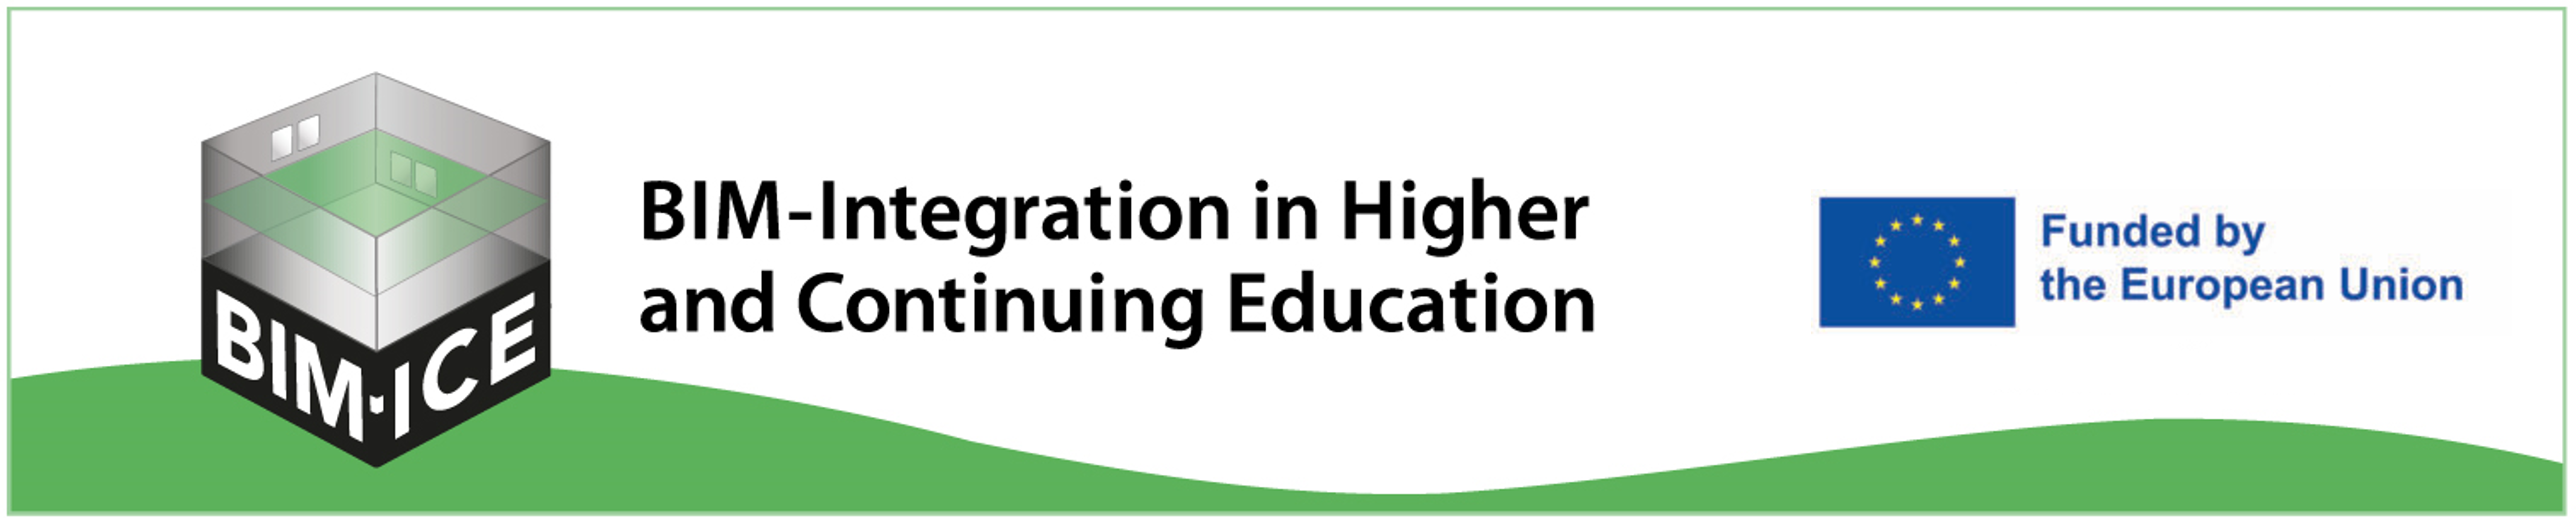 BIM-ICE Project banner - BIM-Integration in Higher and Continuing Education